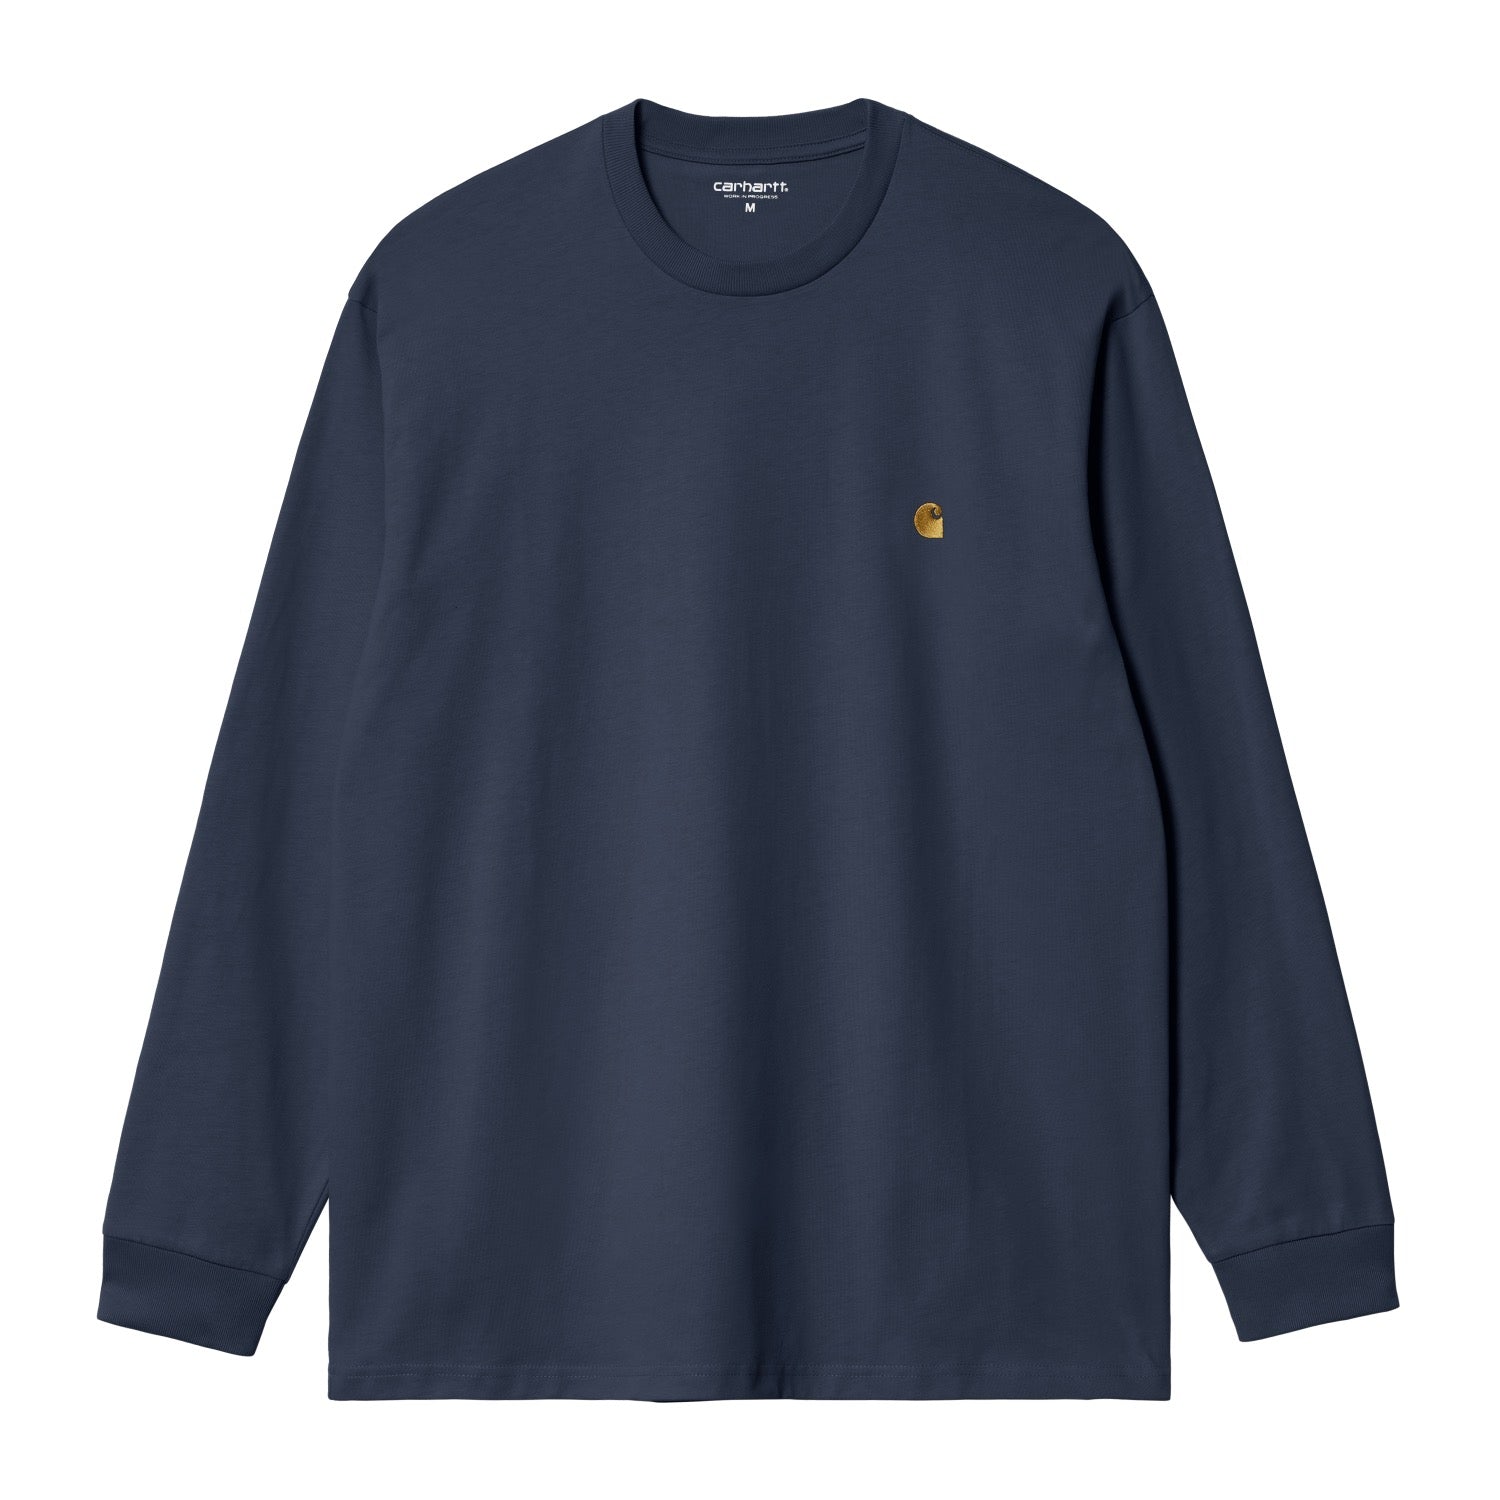 L/S CHASE T-SHIRT - Blue / Gold